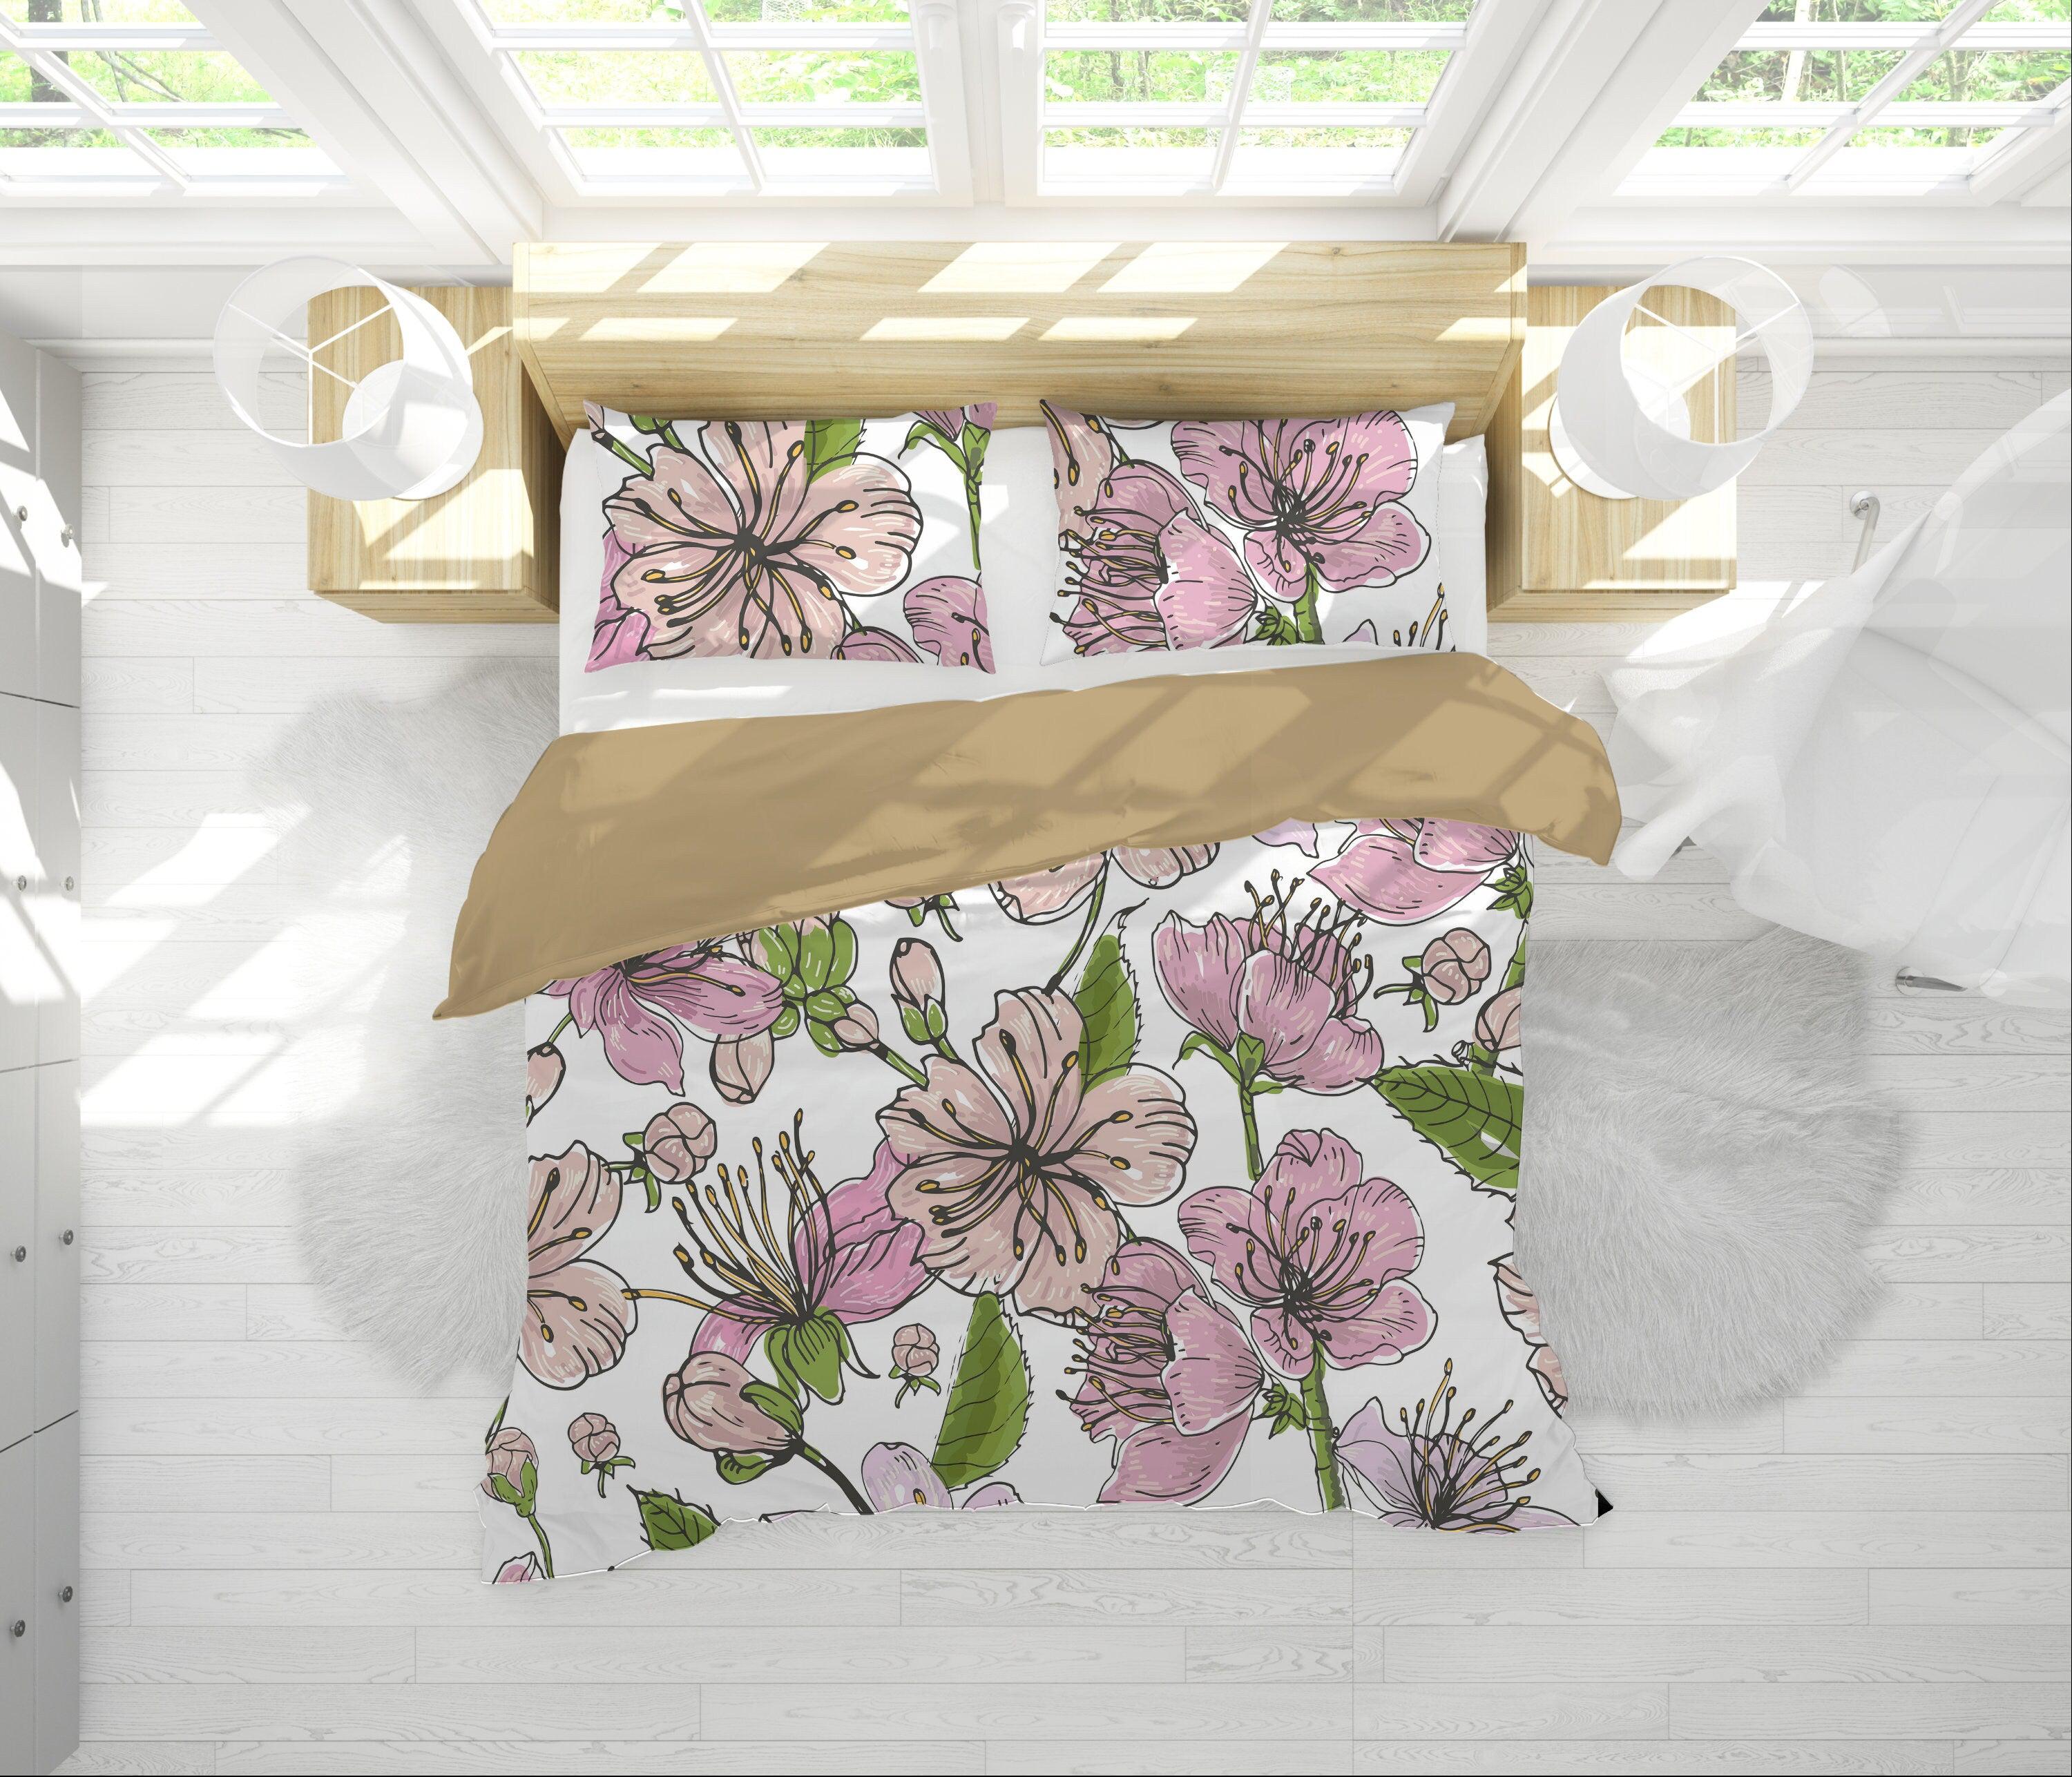 daintyduvet Cherry Blossoms White Duvet Cover Set | Floral Bedding Set with Pillow Cover Case